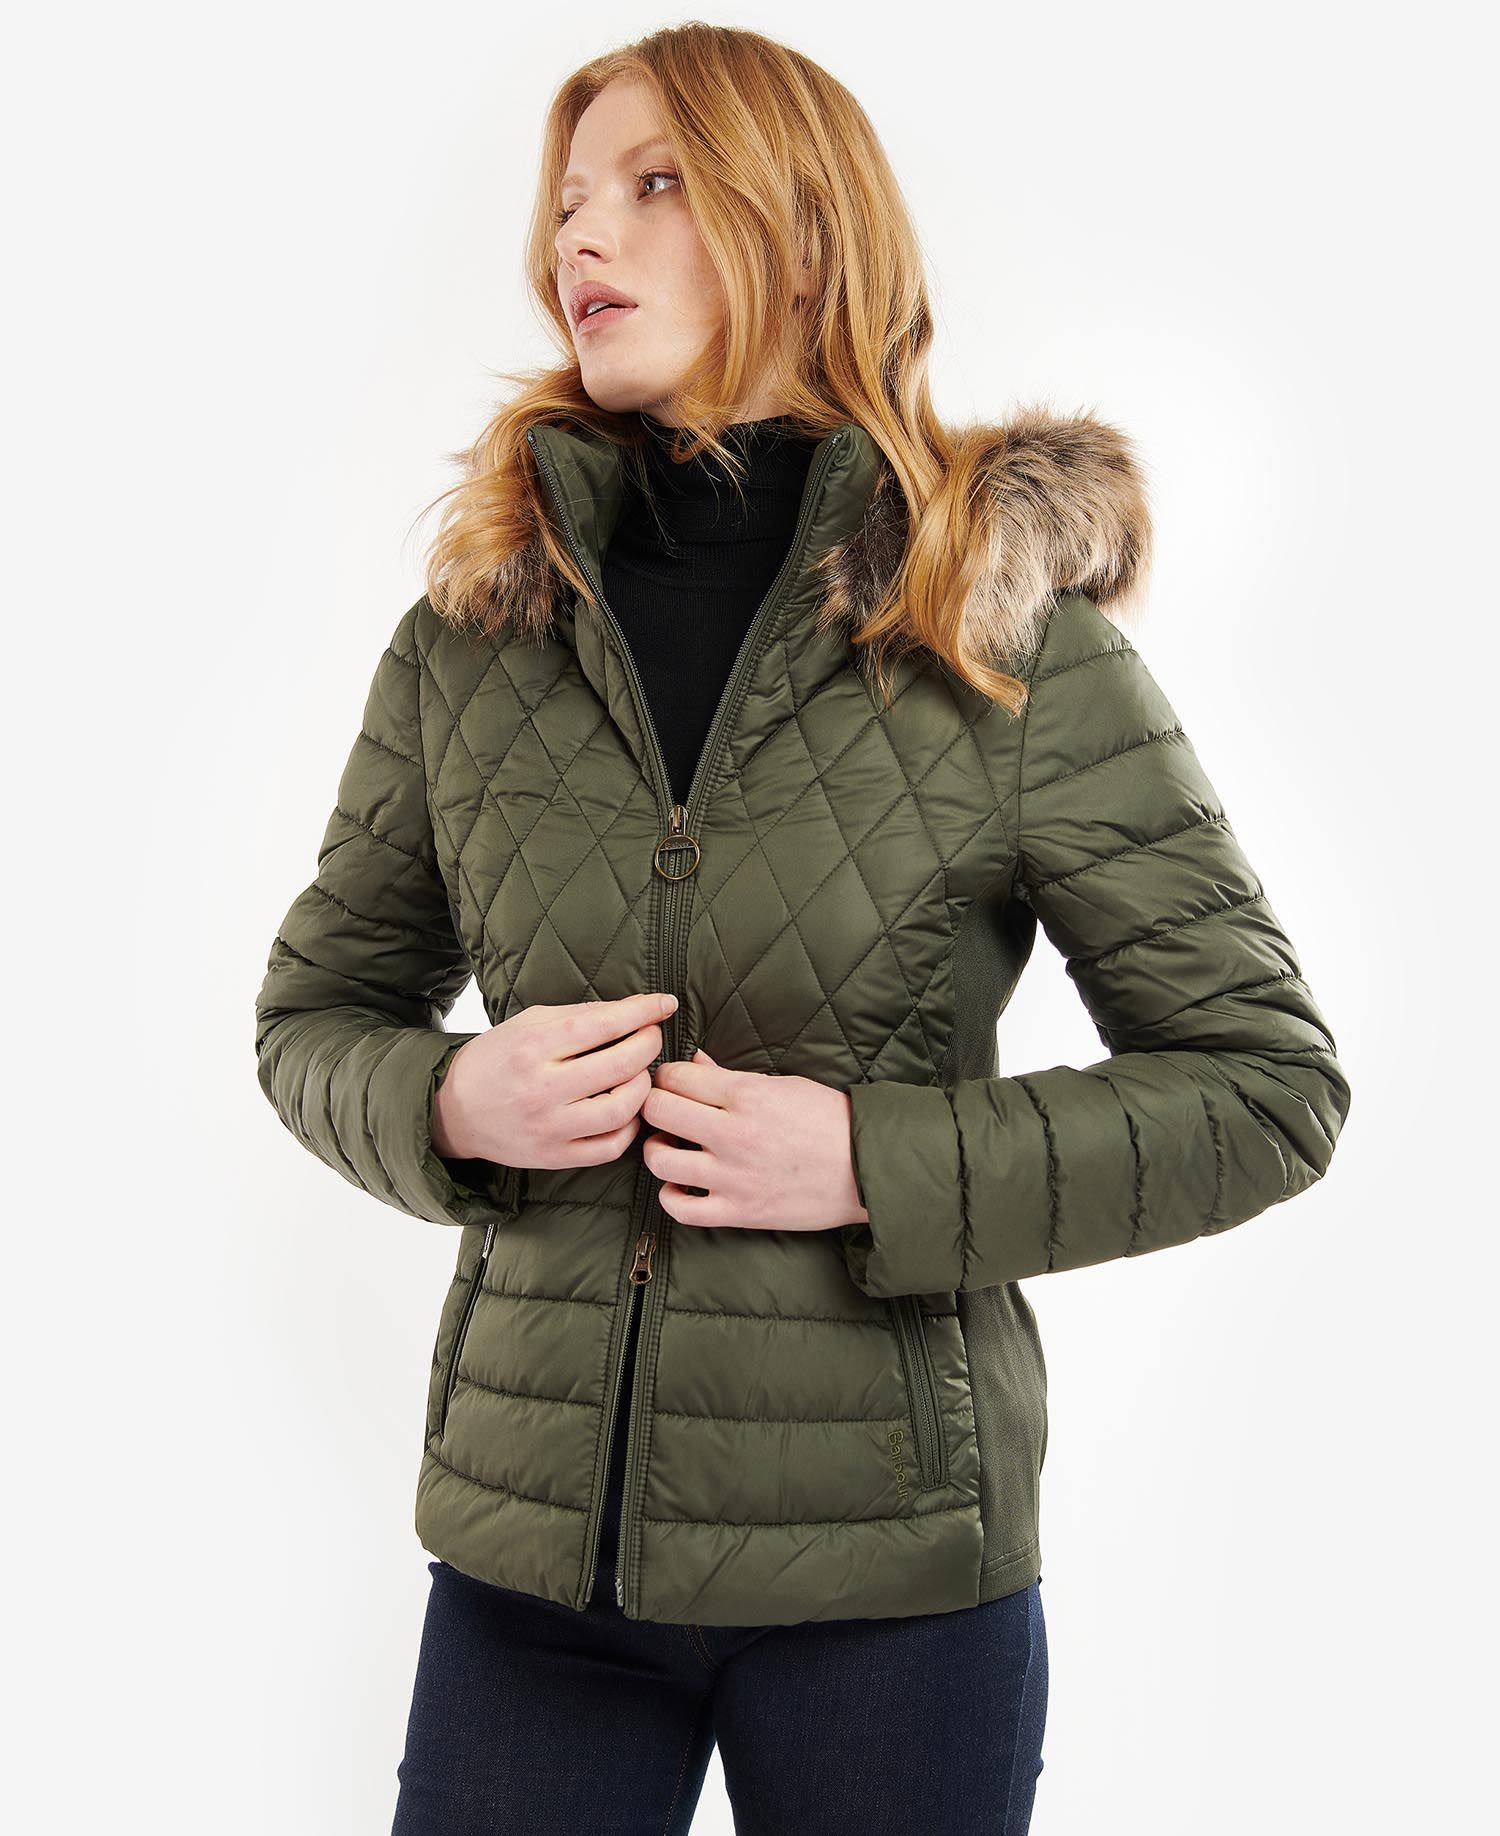 Barbour Mallow Quilt Olive - Fawcetts Online